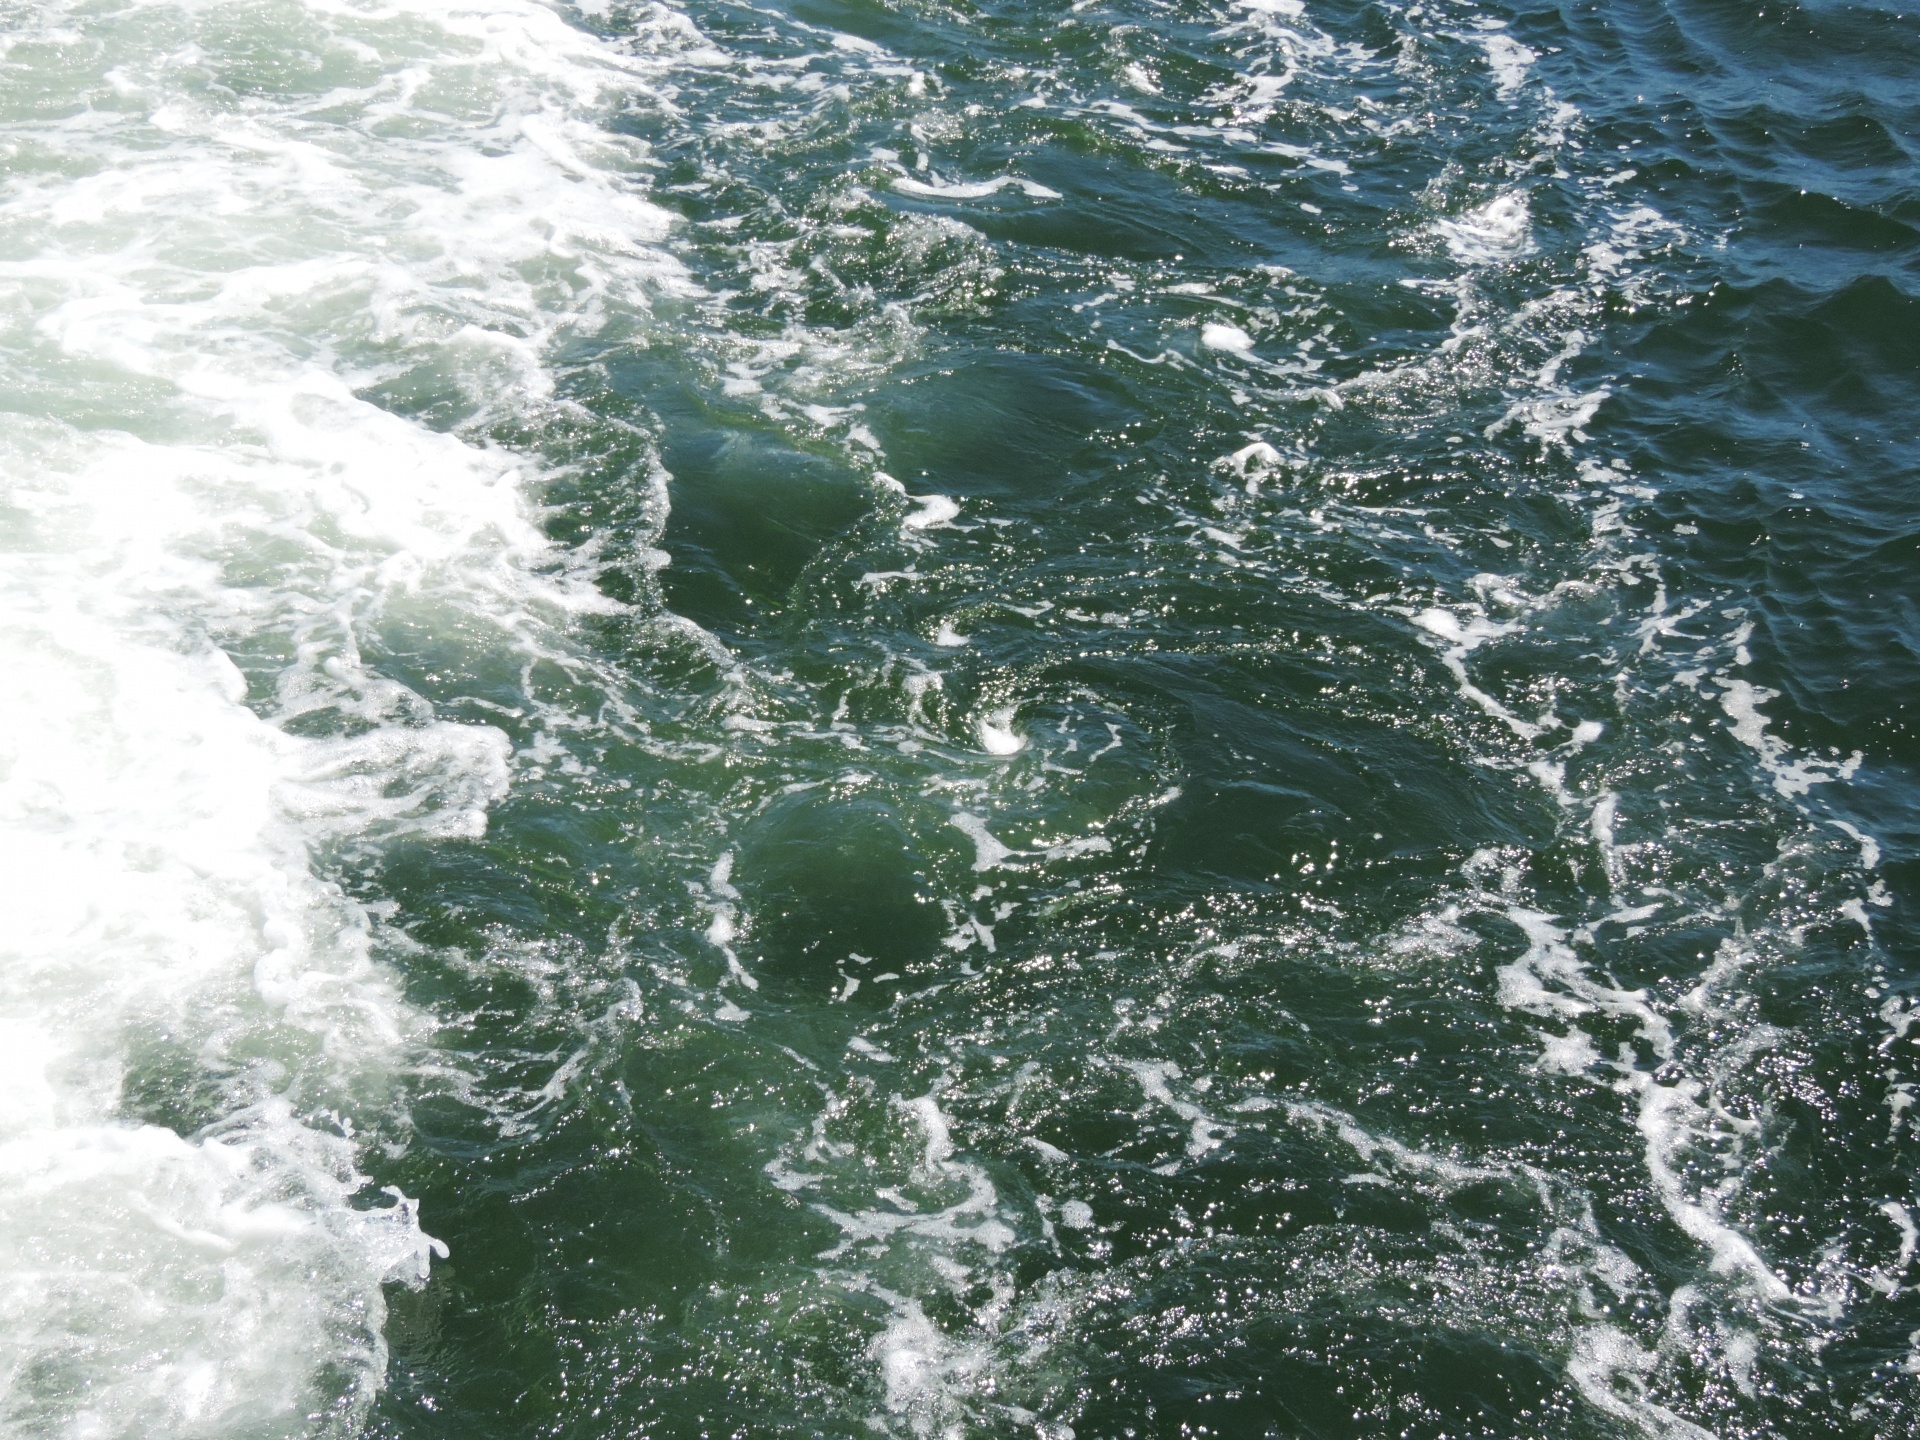 Waves from a boat